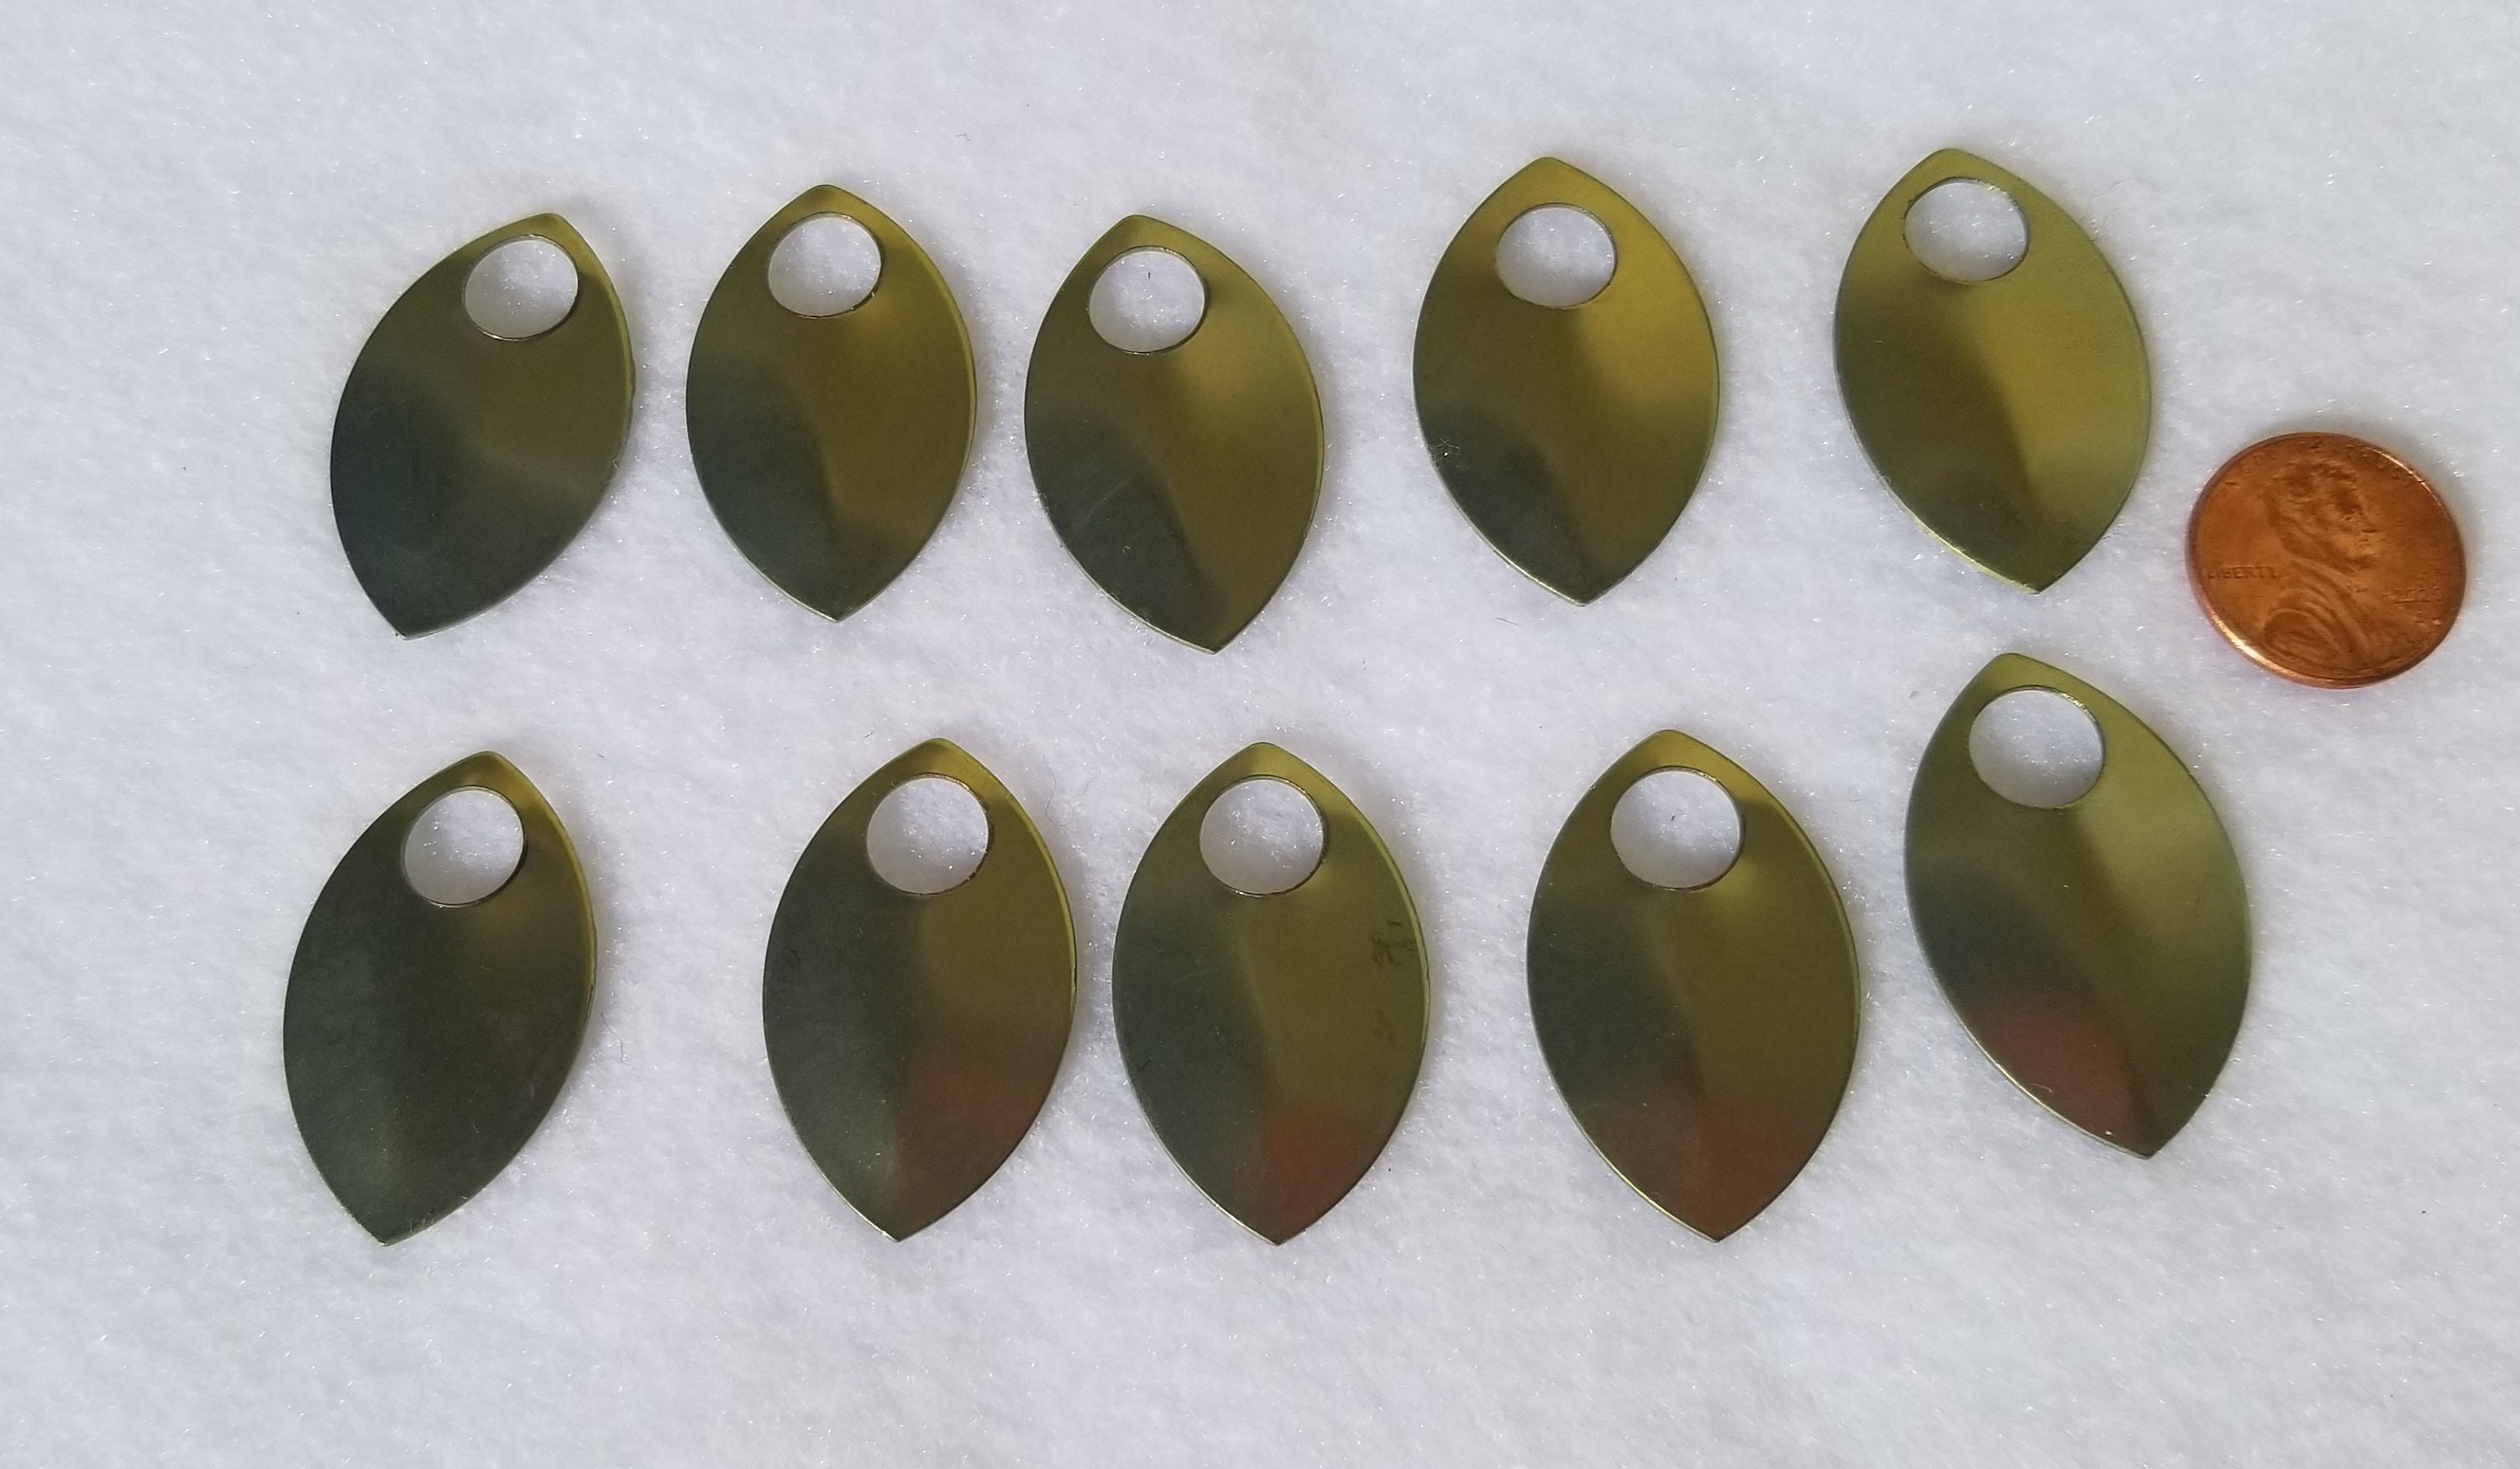 Buy Dragon Scales Titanium GOLD Large Sets of 10 Online in India